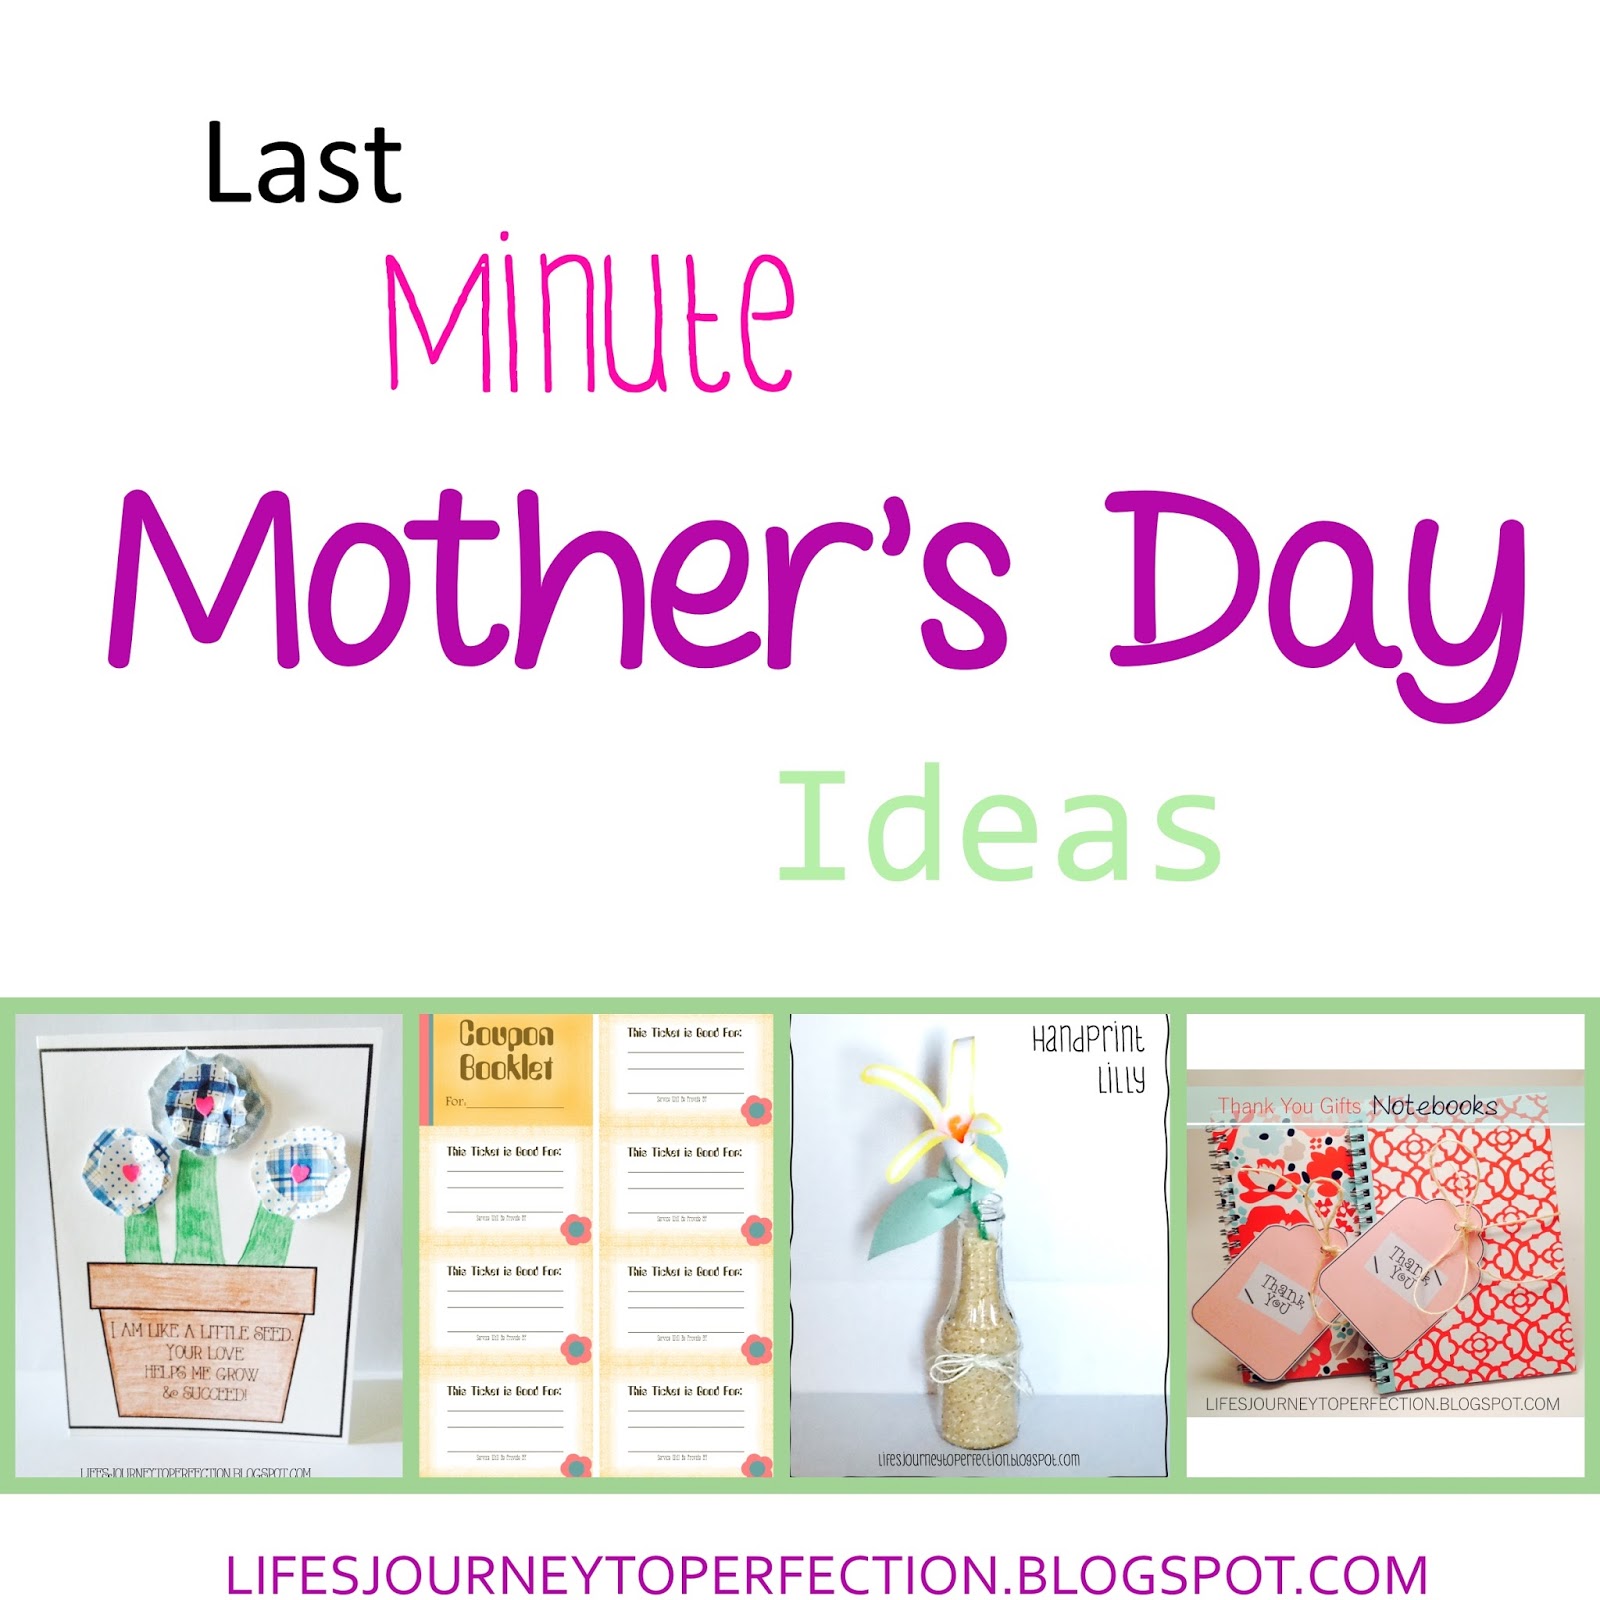 Life's Journey To Perfection: Last Minute Mother's Day Ideas